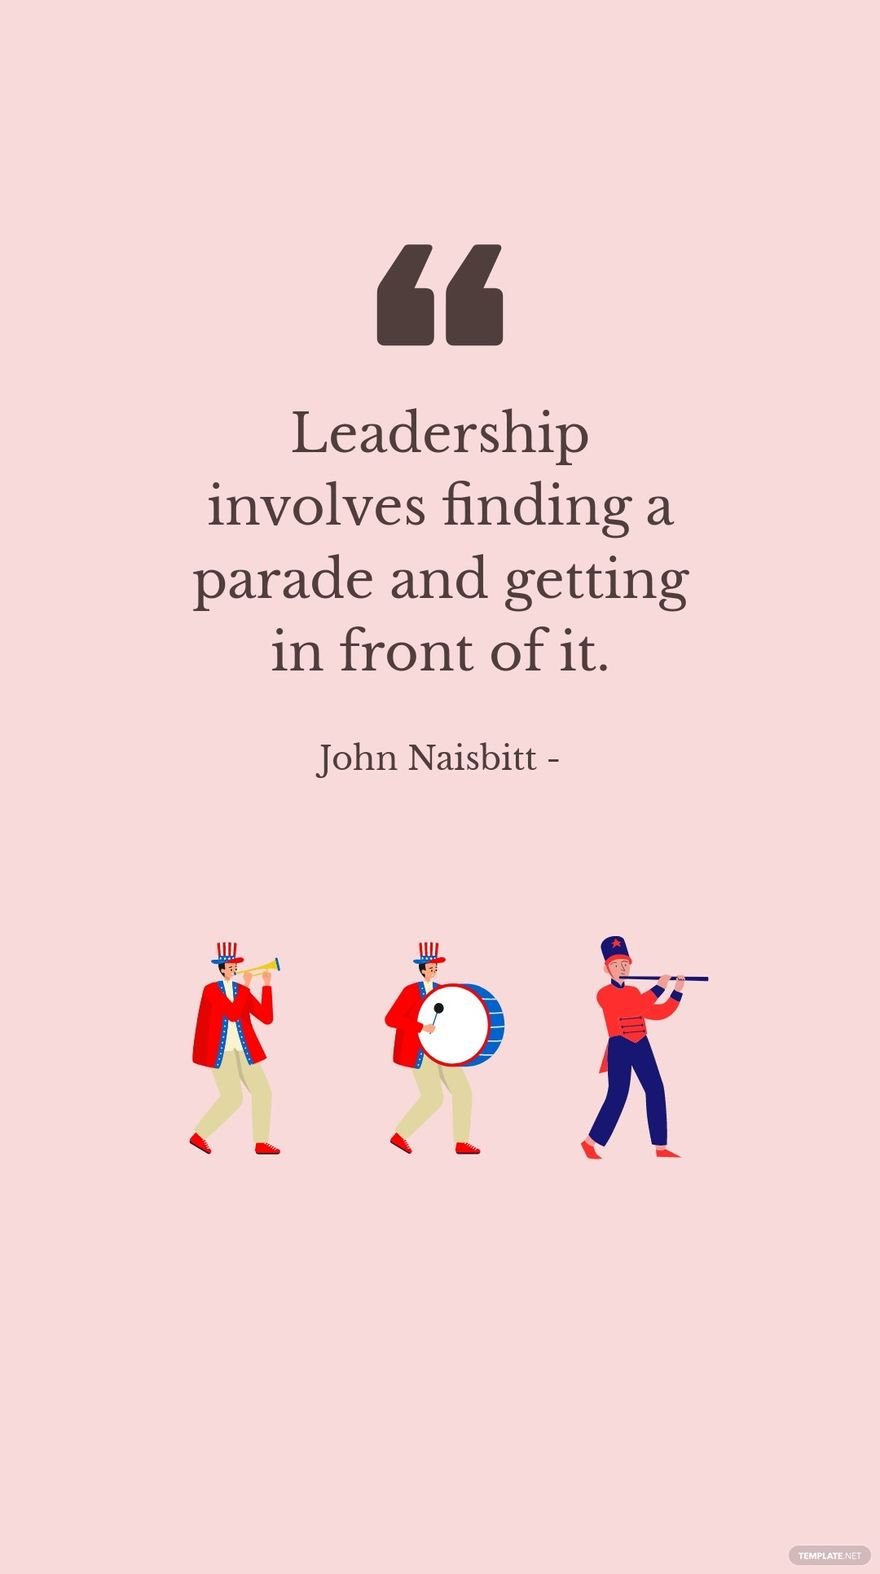 John Naisbitt - Leadership involves finding a parade and getting in front of it. in JPG